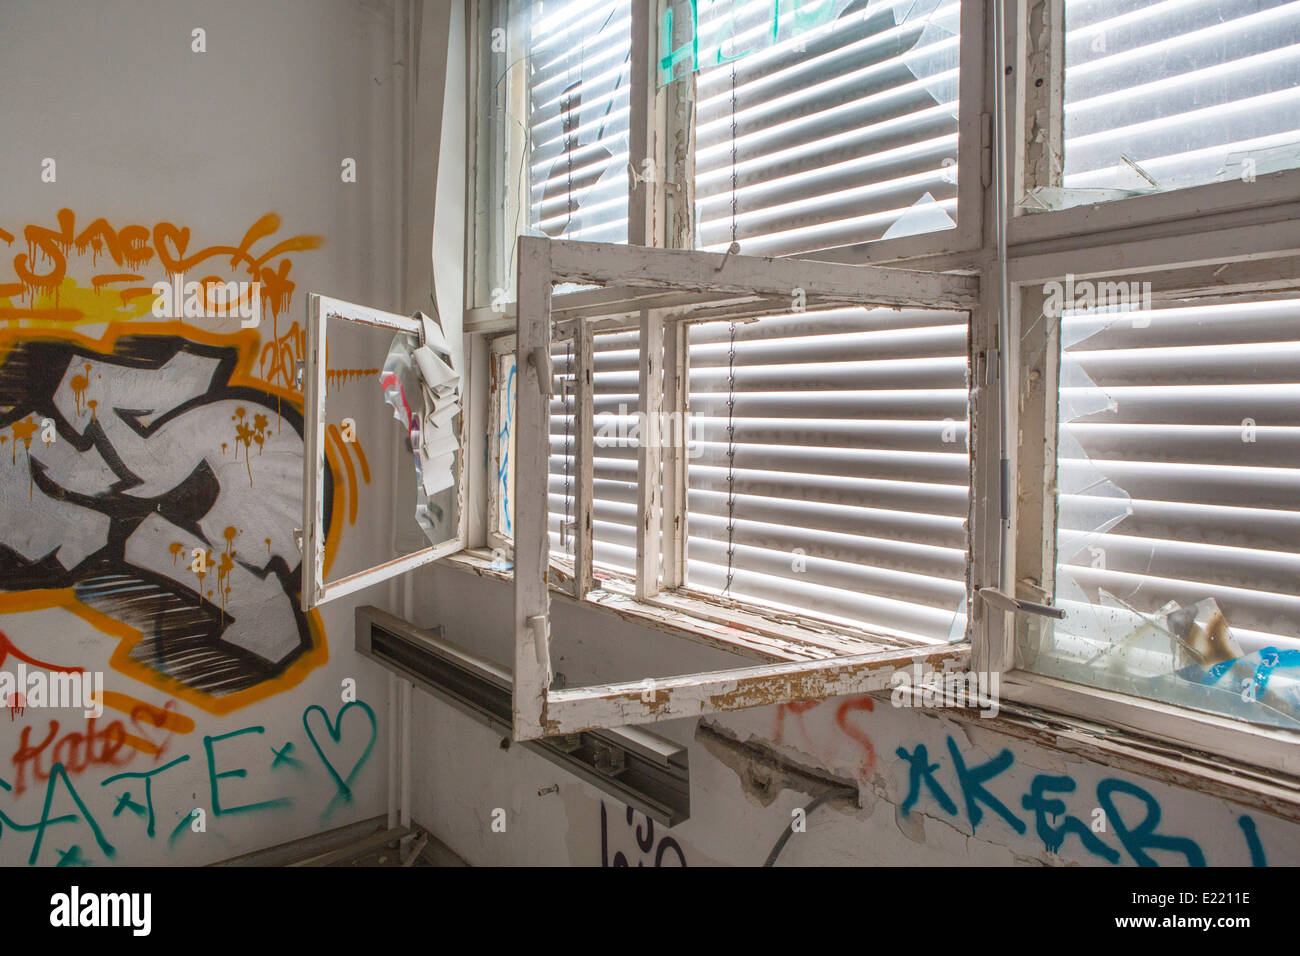 Abandoned flat building (GDR times) with graffiti sprayed, Berlin, Germany Stock Photo